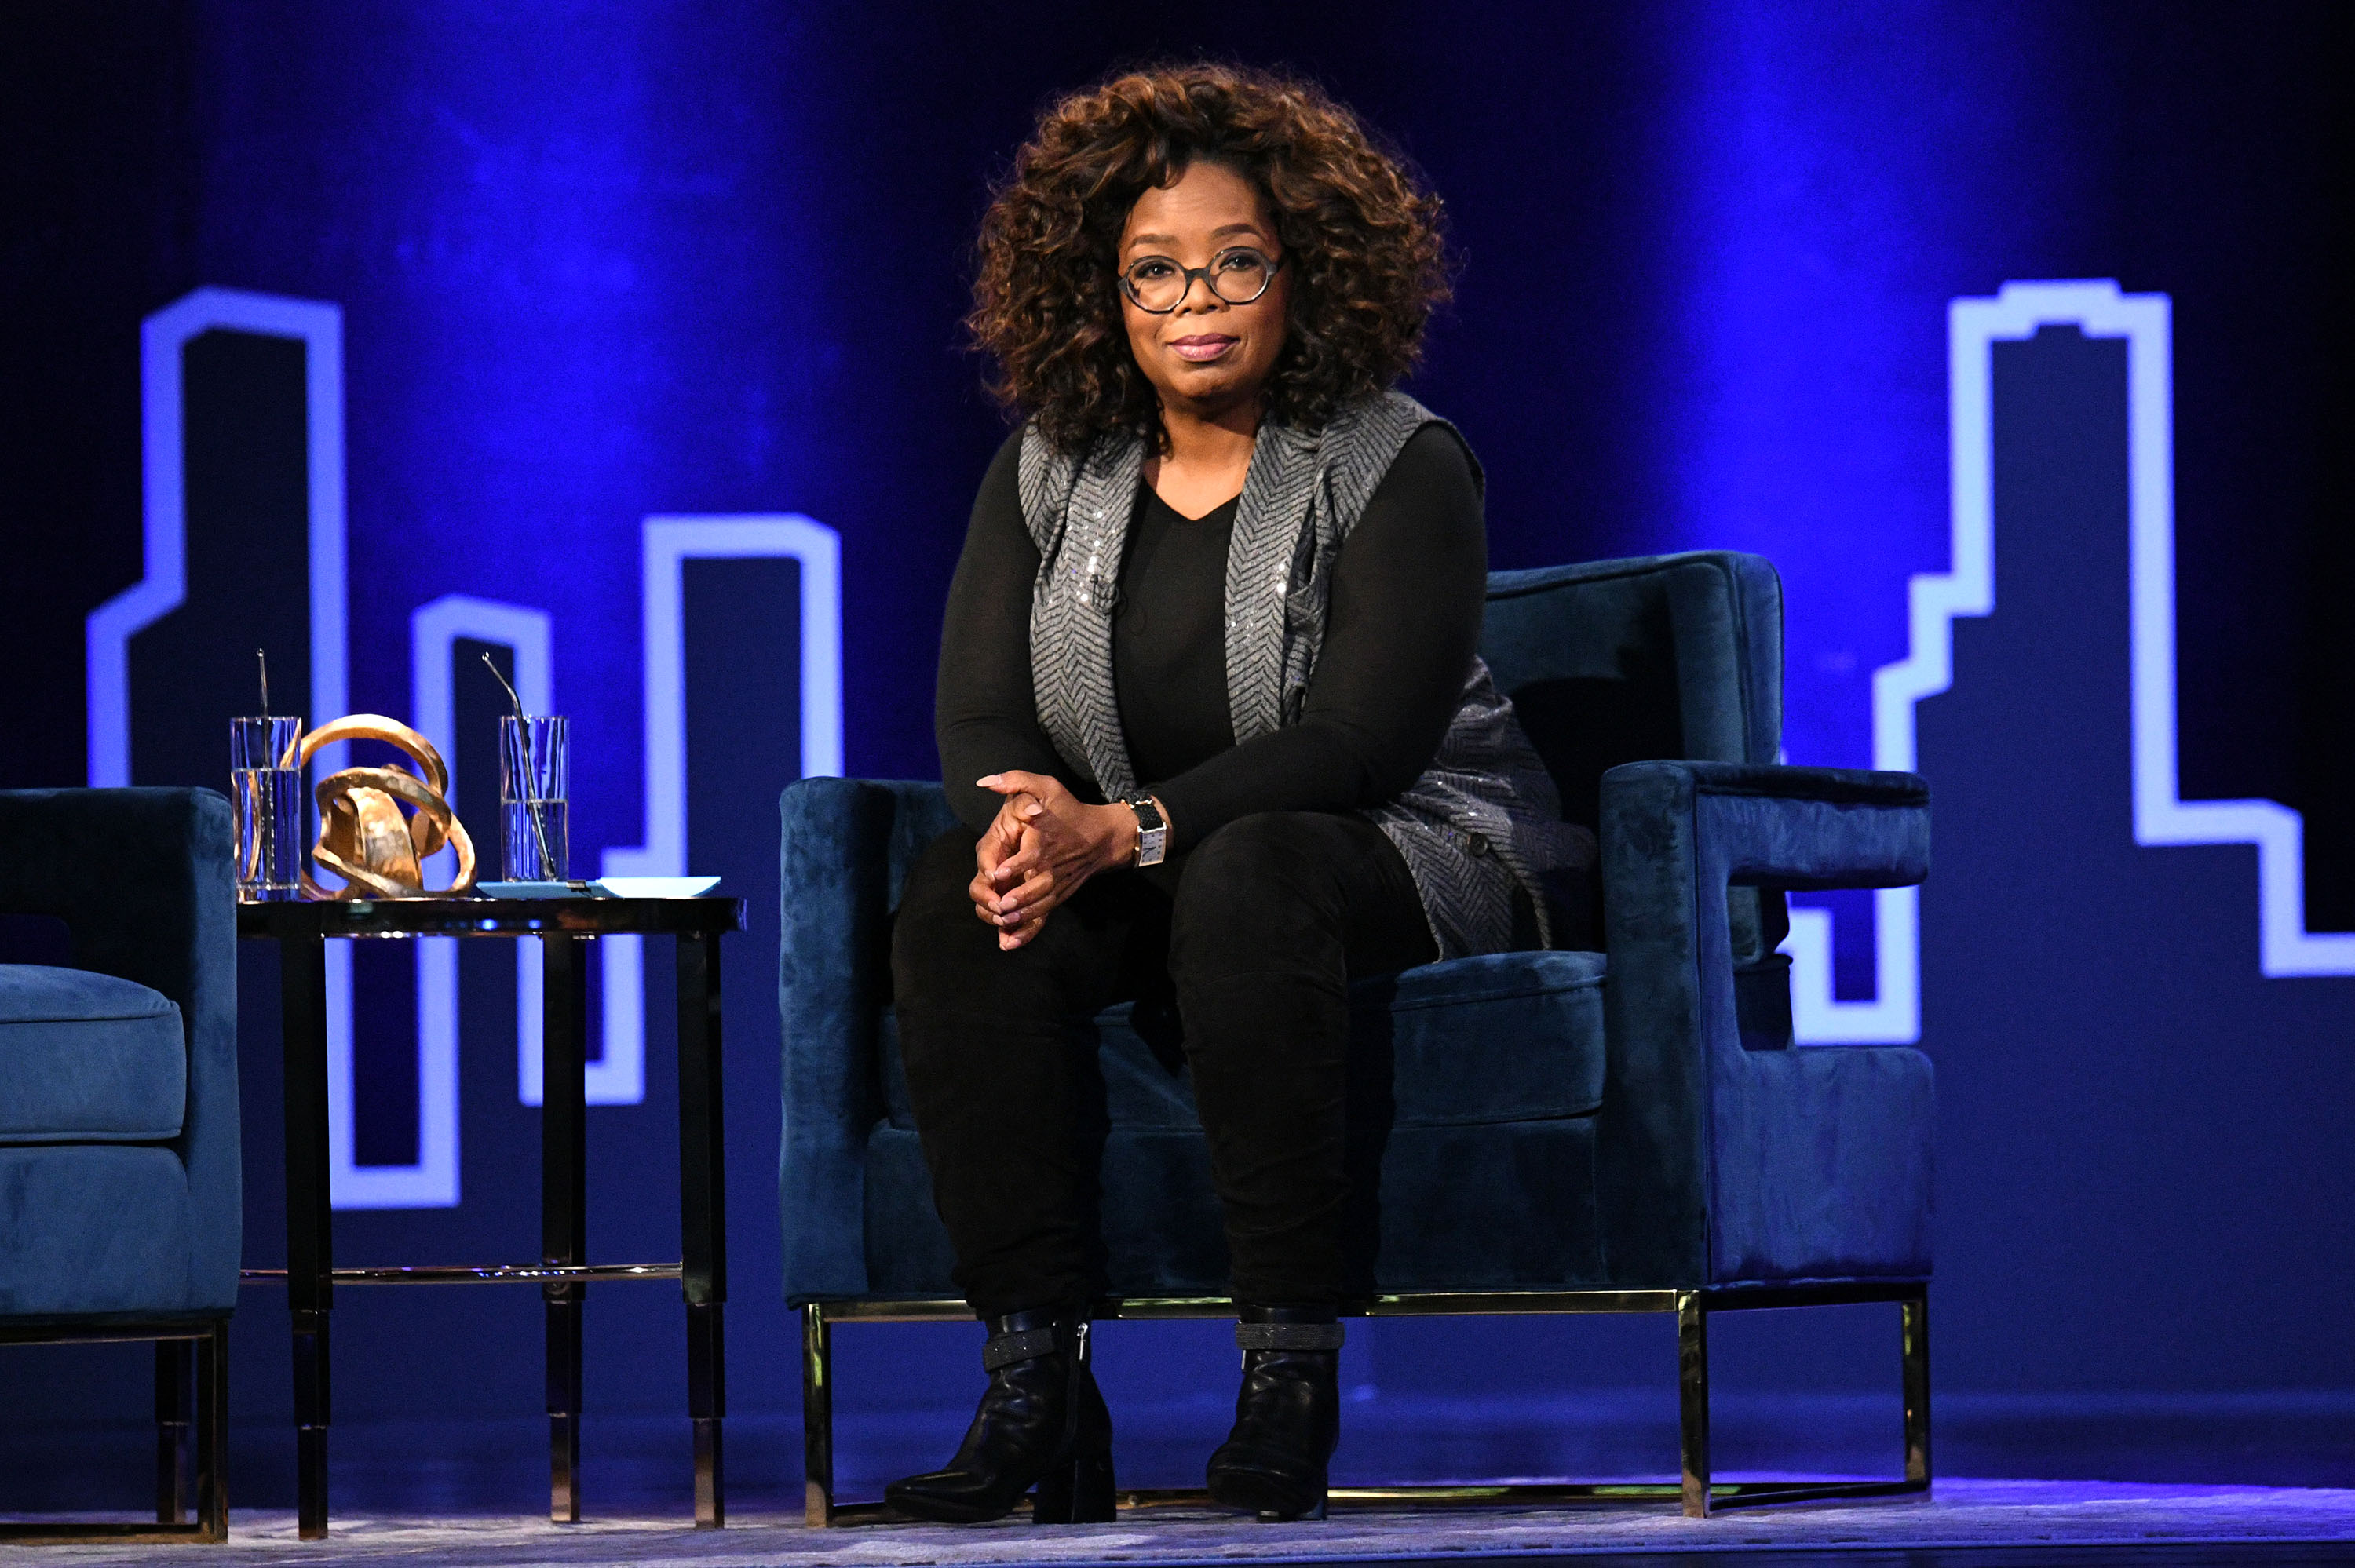 Oprah Winfrey speaks onstage during Oprah's SuperSoul Conversations at PlayStation Theater on February 05, 2019 in New York City